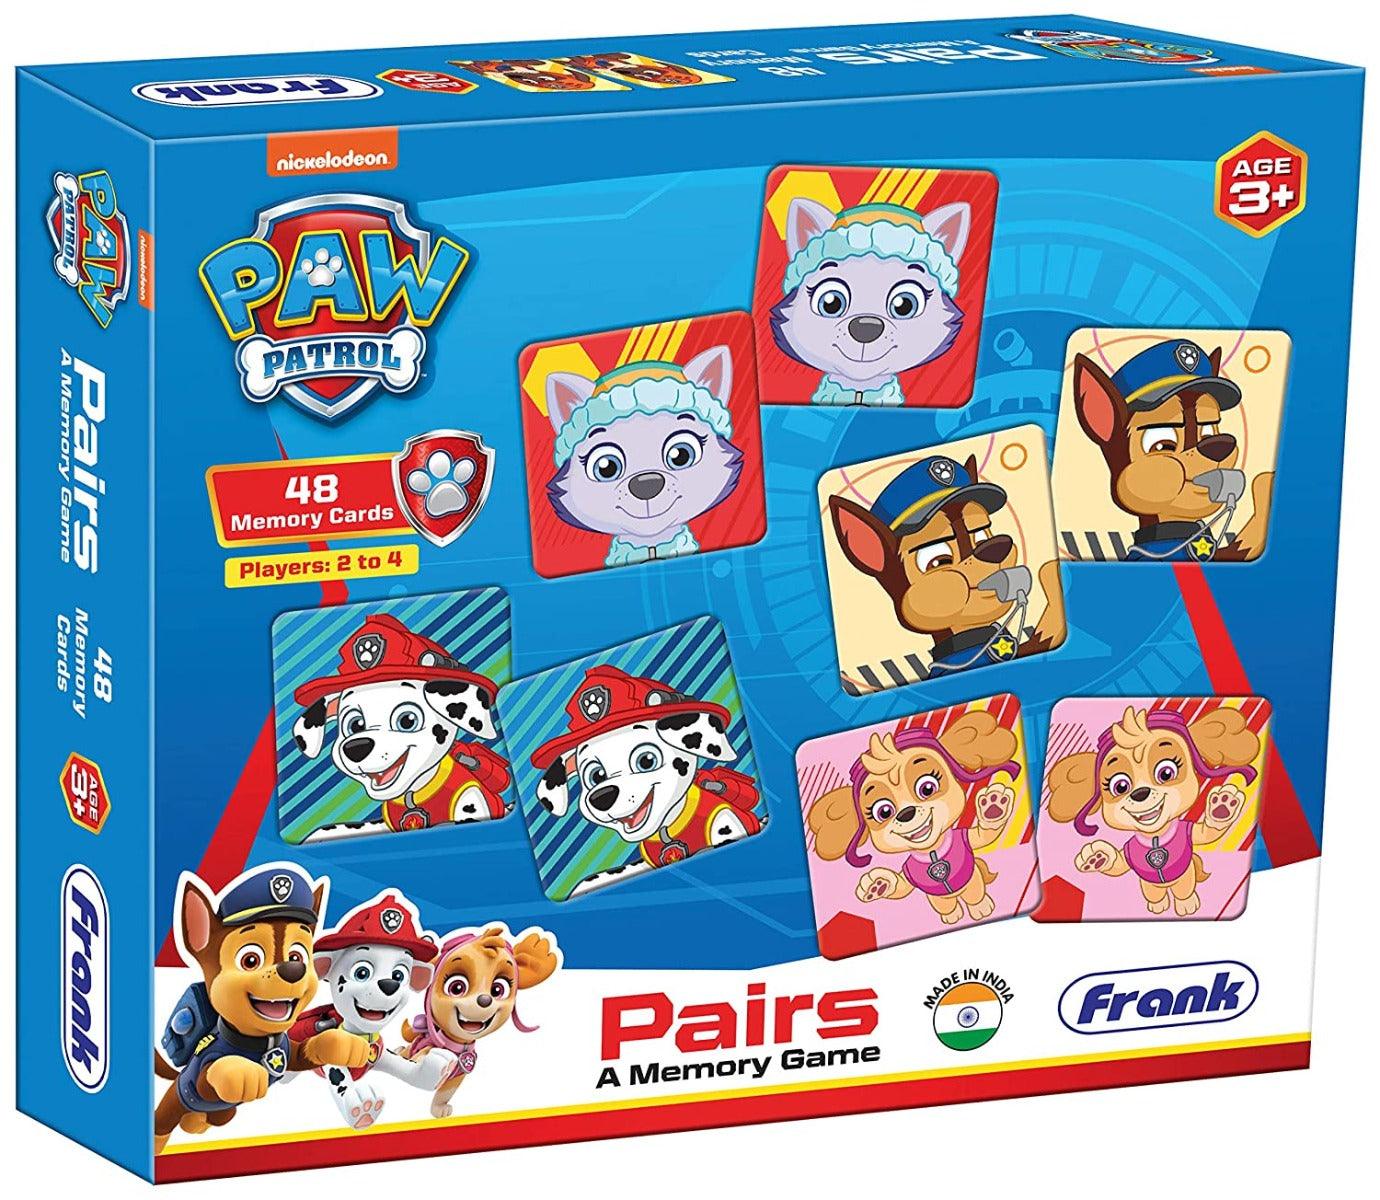 Frank Paw Patrol - Pairs A Memory Game for 3 Years and Above